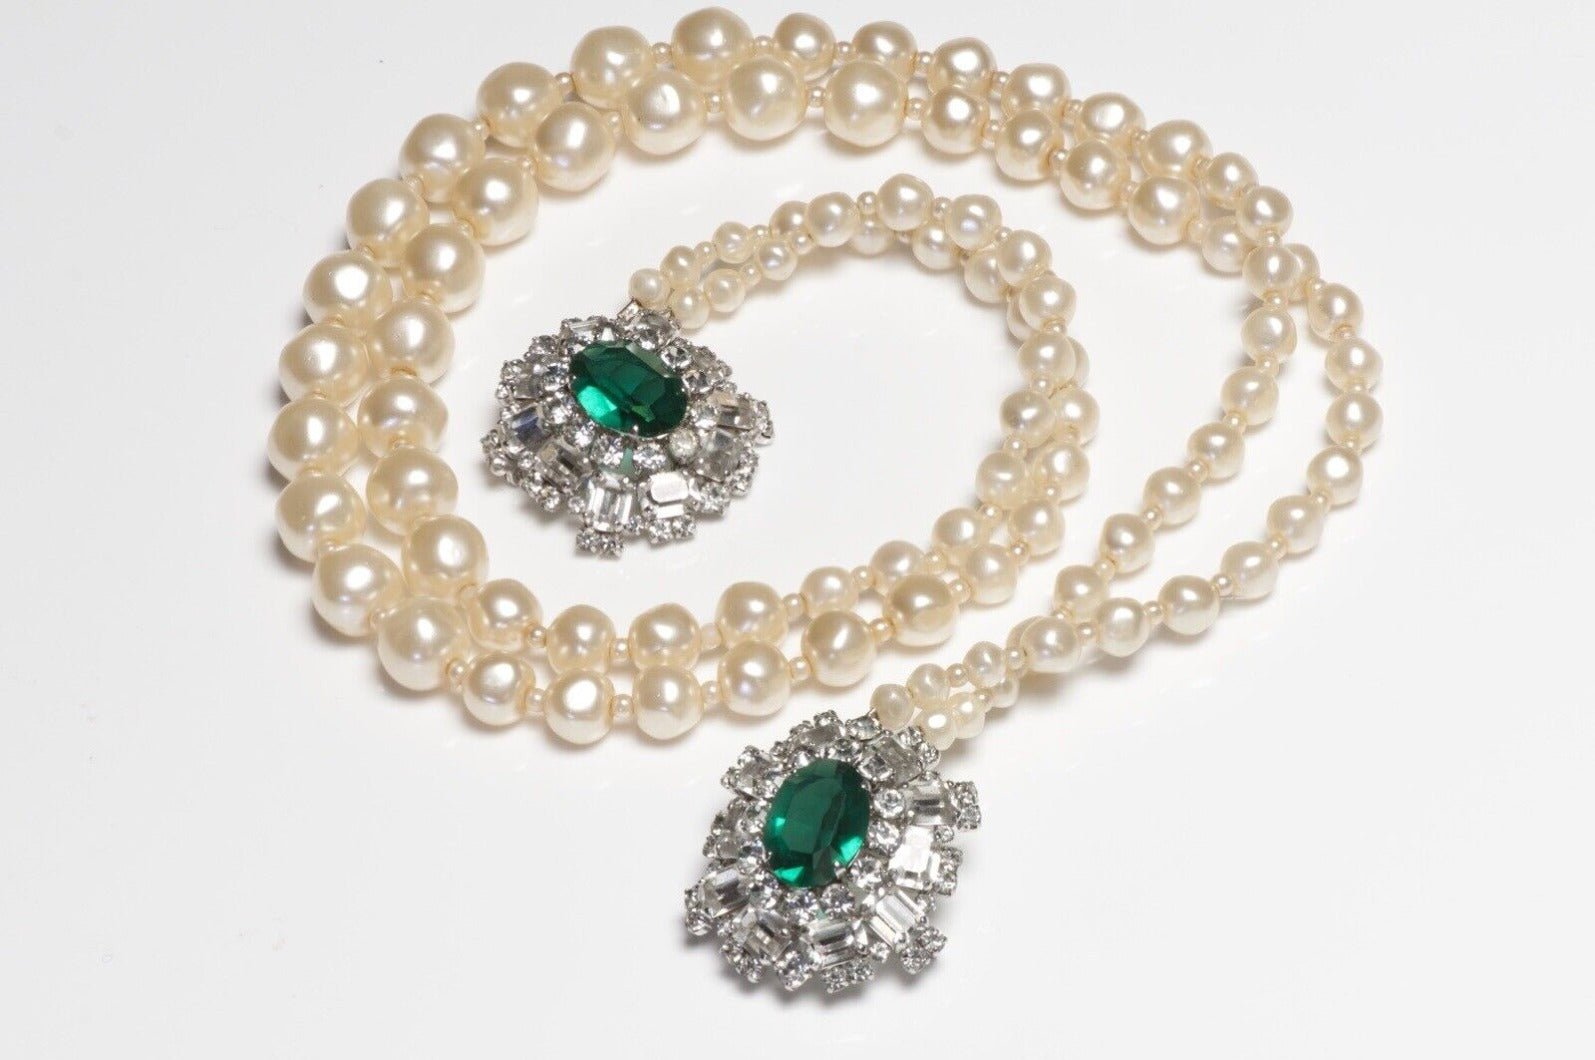 Christian Dior 1961 Marc Bohan Pearl Green Crystal Double Brooch Necklace - DSF Antique Jewelry